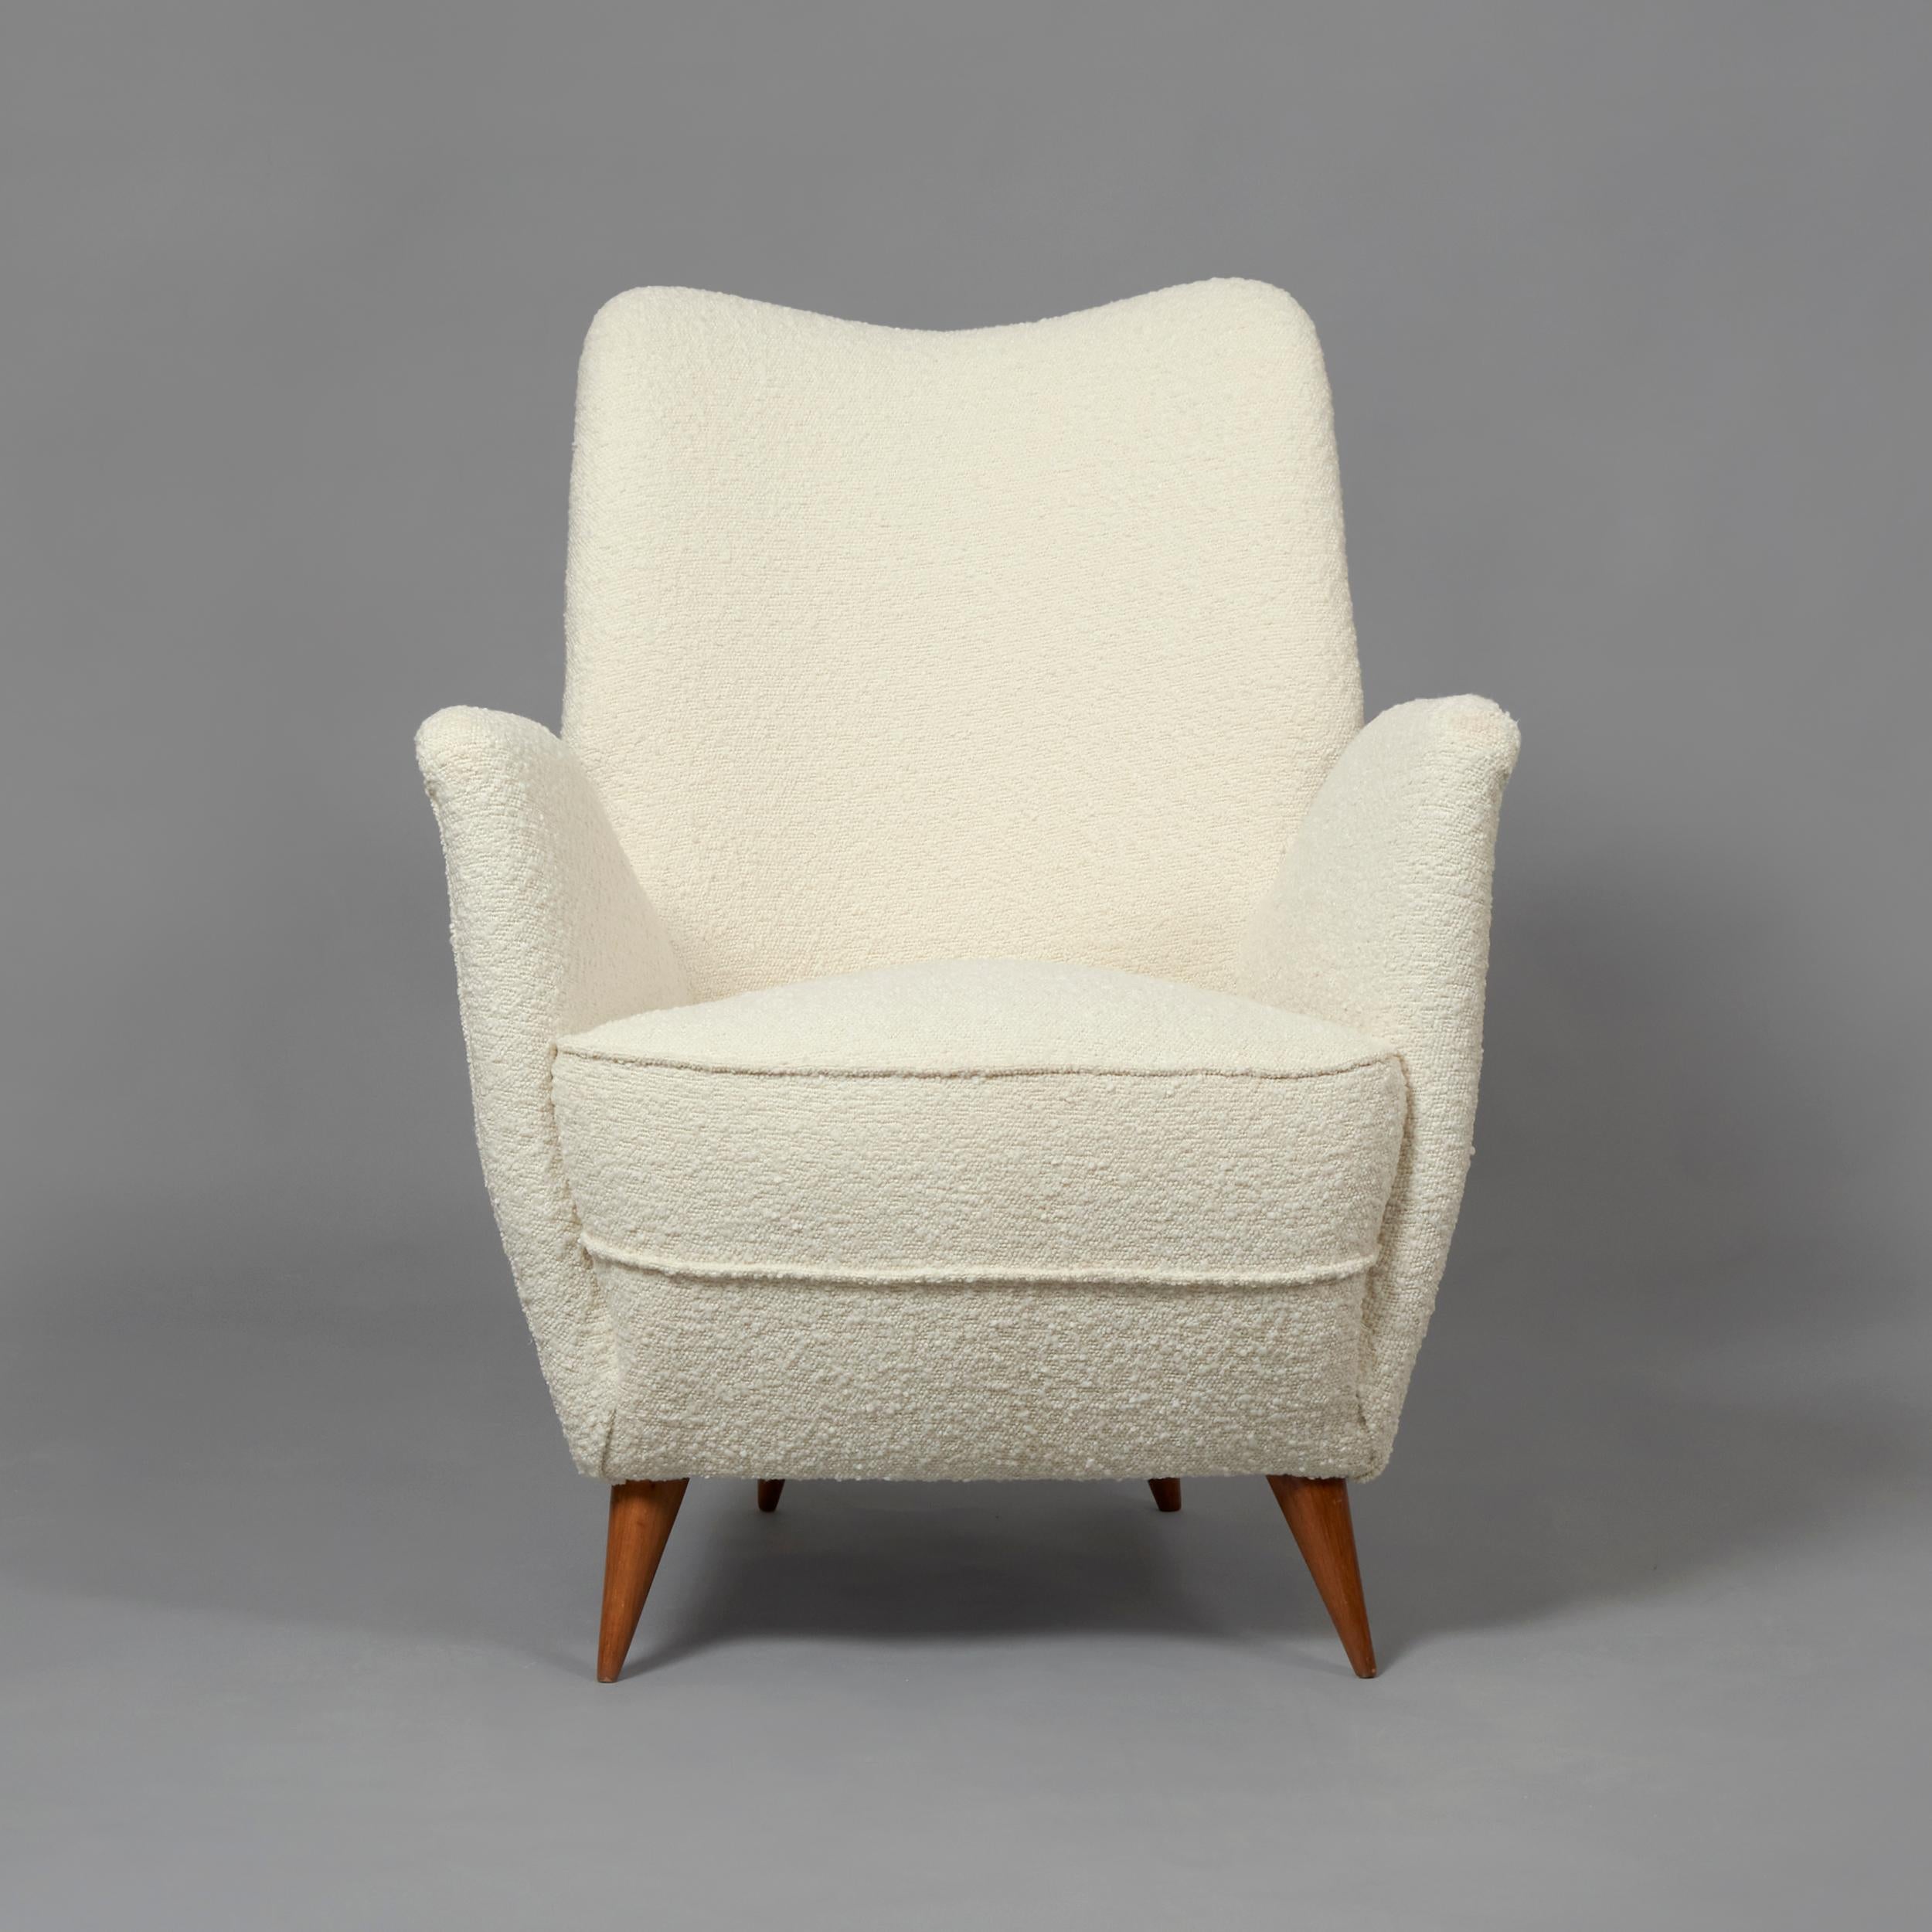 Little Italian armchair produced manufactured by Isa Bergamo. Excellent restored condition. Legs in Beech. Re-upholstered in white bouclé. Italy 1950s

This armchair is designed in the style of Gio Ponti's designs for the same company. 

